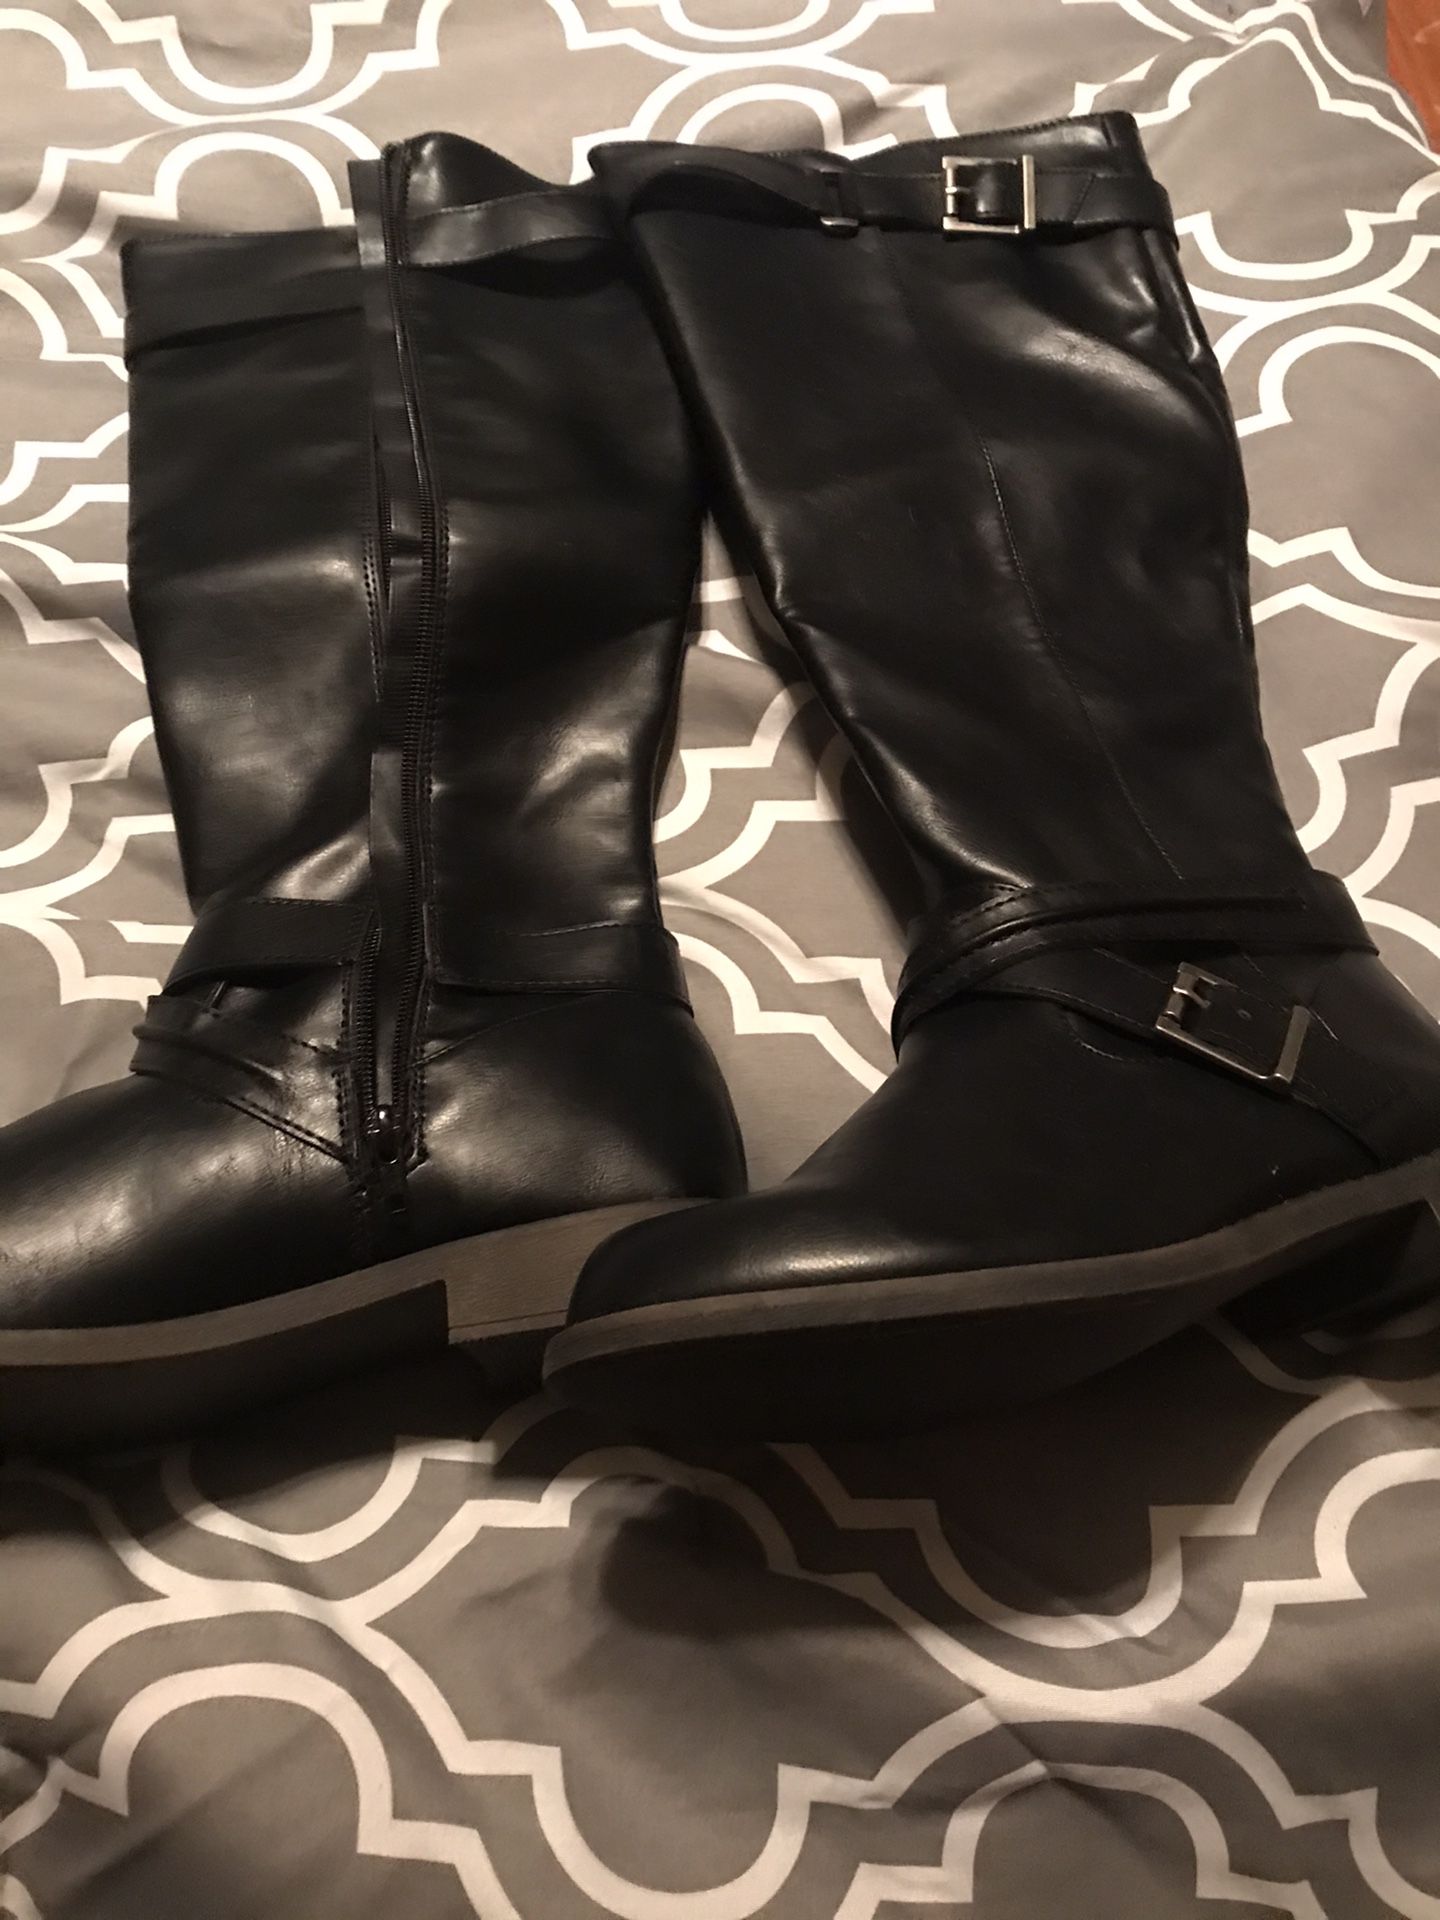 Size 10 women’s boots from Just Fab. Snow & Calloway area